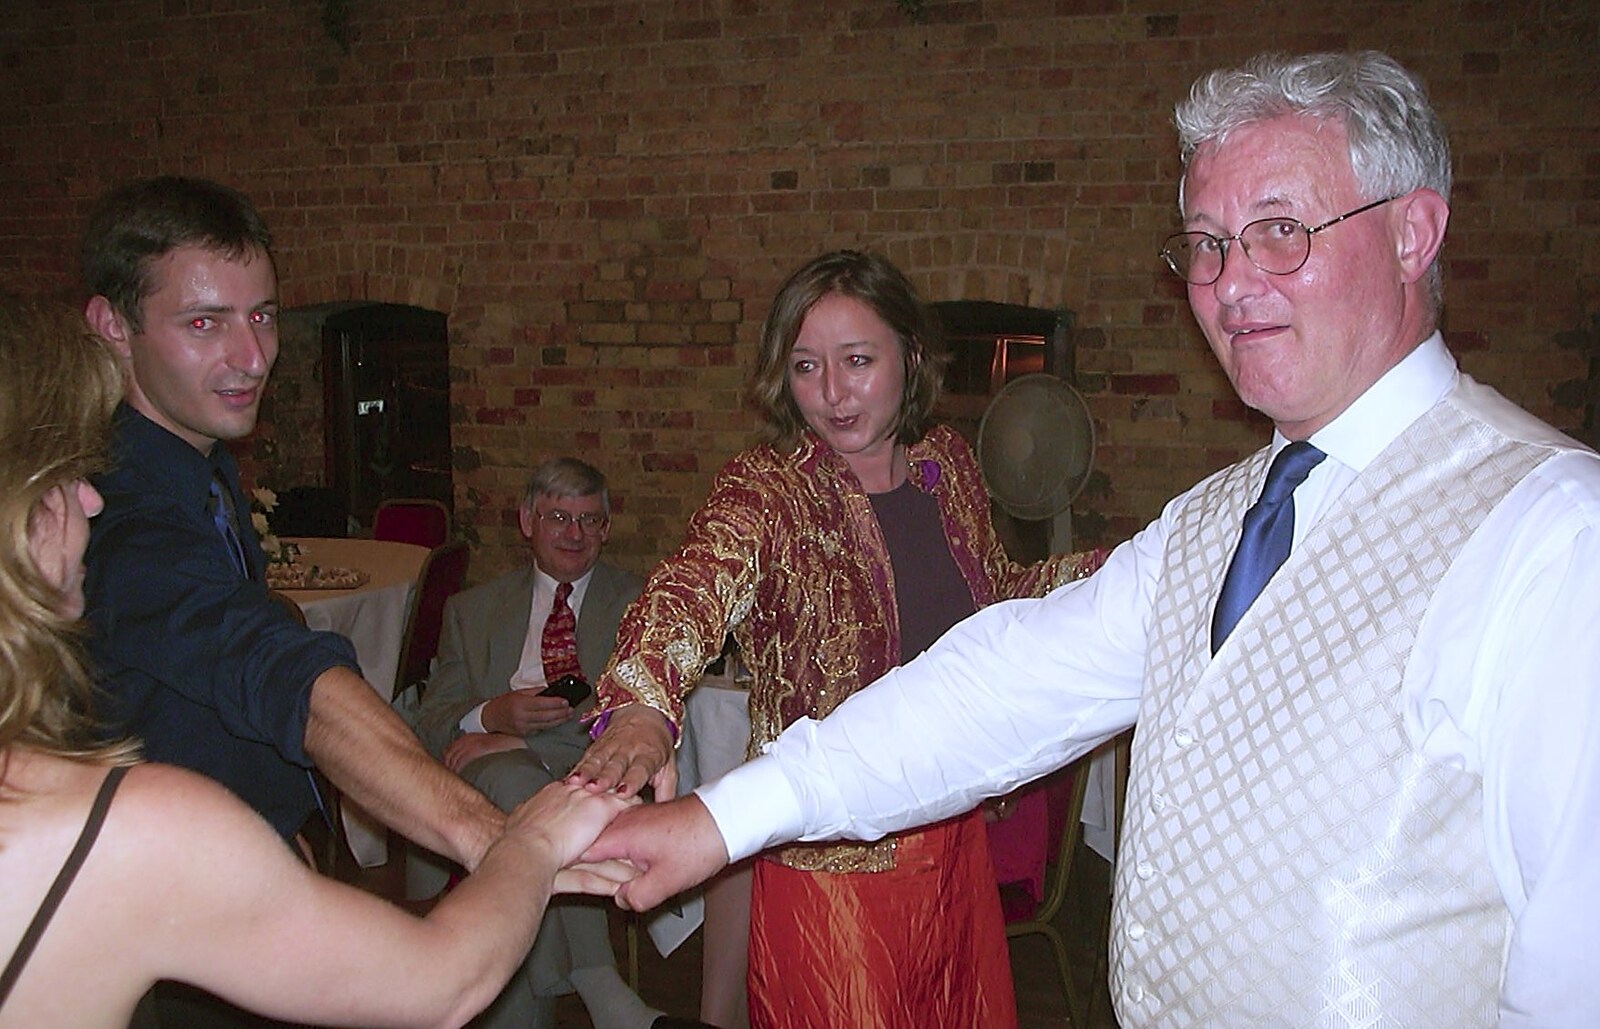 Stef and Kath's 3G Lab Wedding, Ely, Cambridgeshire - 28th July 2001: Kath's dad joins in with some ceilidh dancing